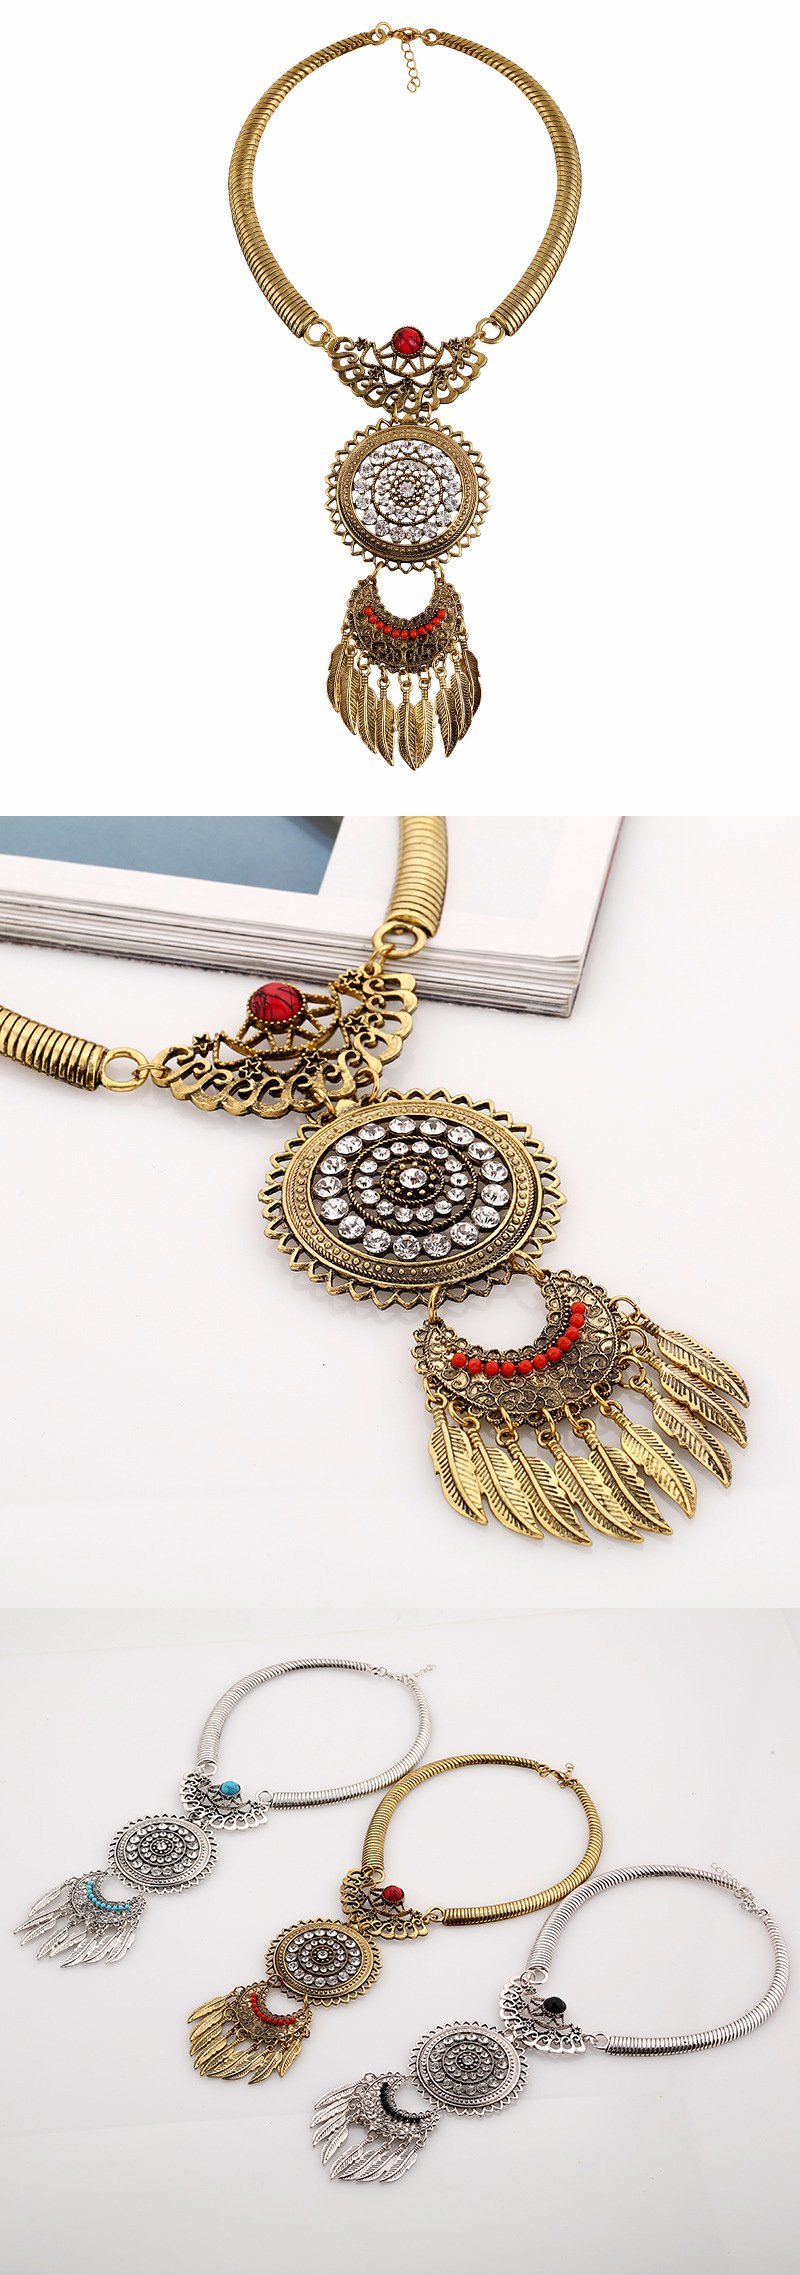 Long Retro Round Red Pearl Jewellery with Gold Leaf Necklace